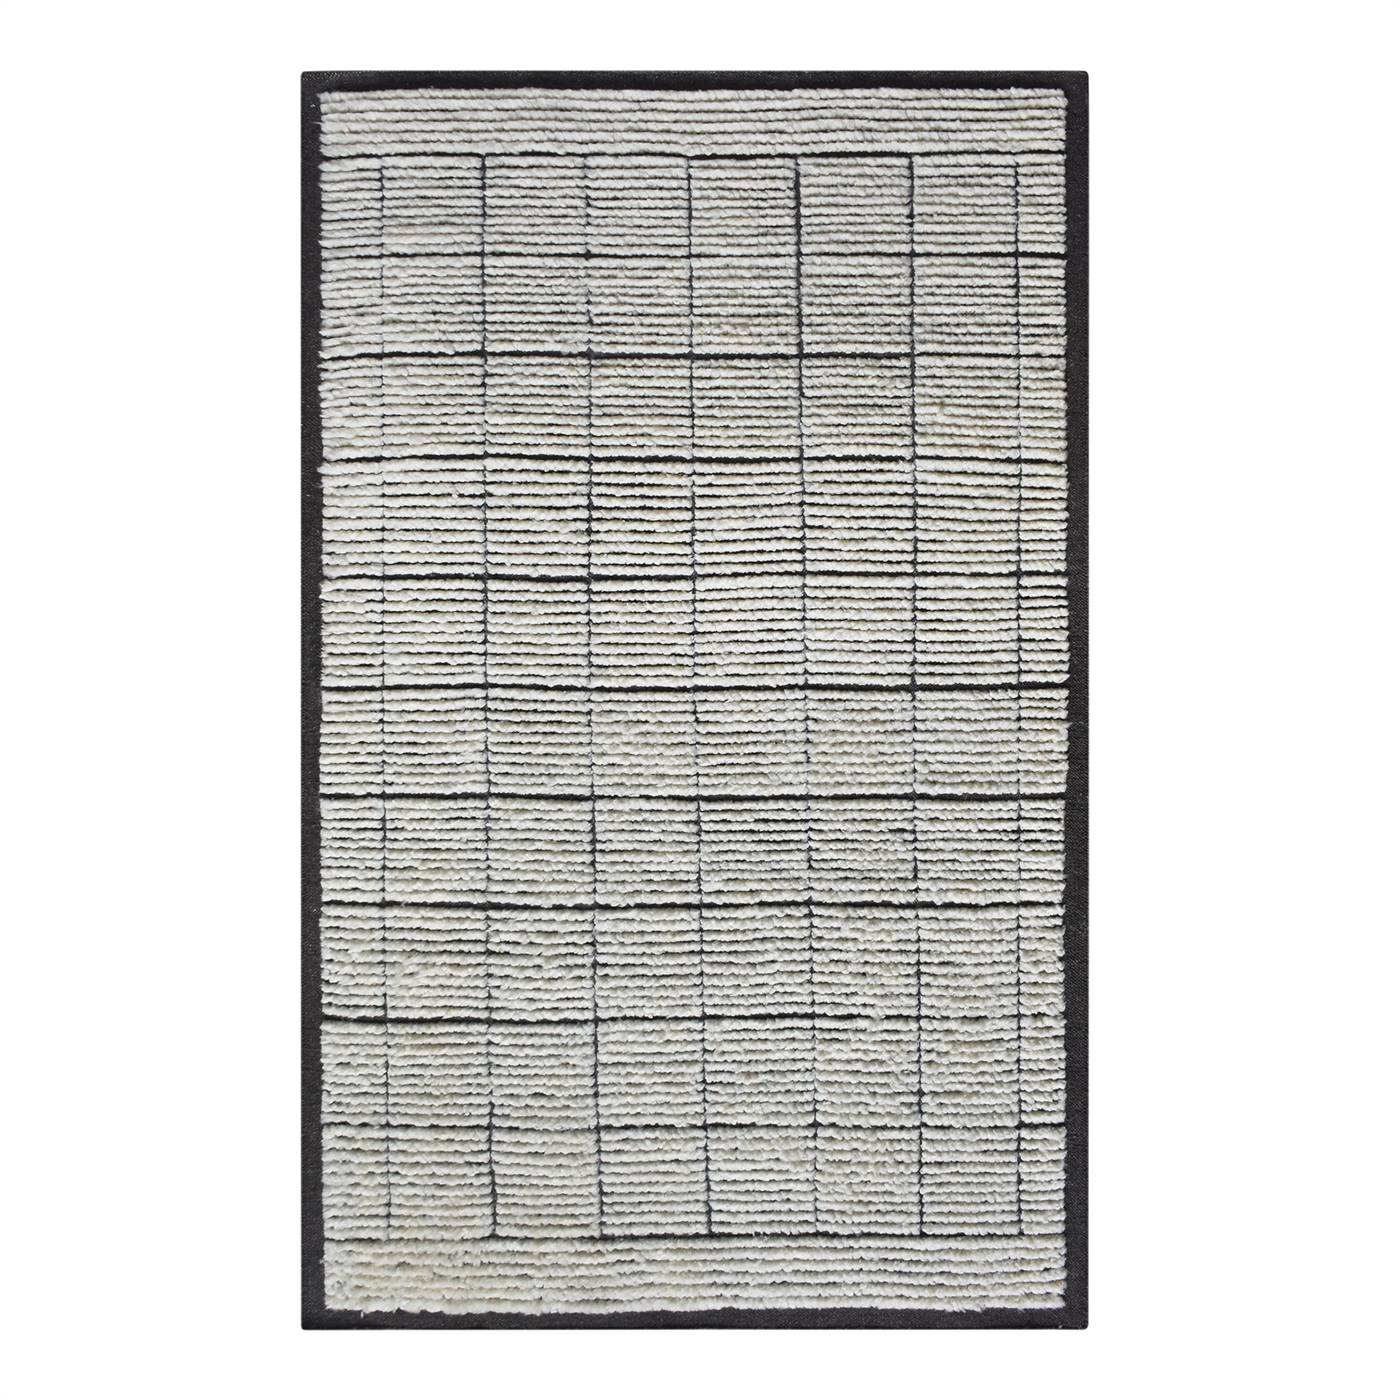 Area Rug, Bedroom Rug, Living Room Rug, Living Area Rug, Indian Rug, Office Carpet, Office Rug, Shop Rug Online, Charcoal, Natural White , Nz Wool , Hand Knotted , Handknotted, All Cut, Intricate 